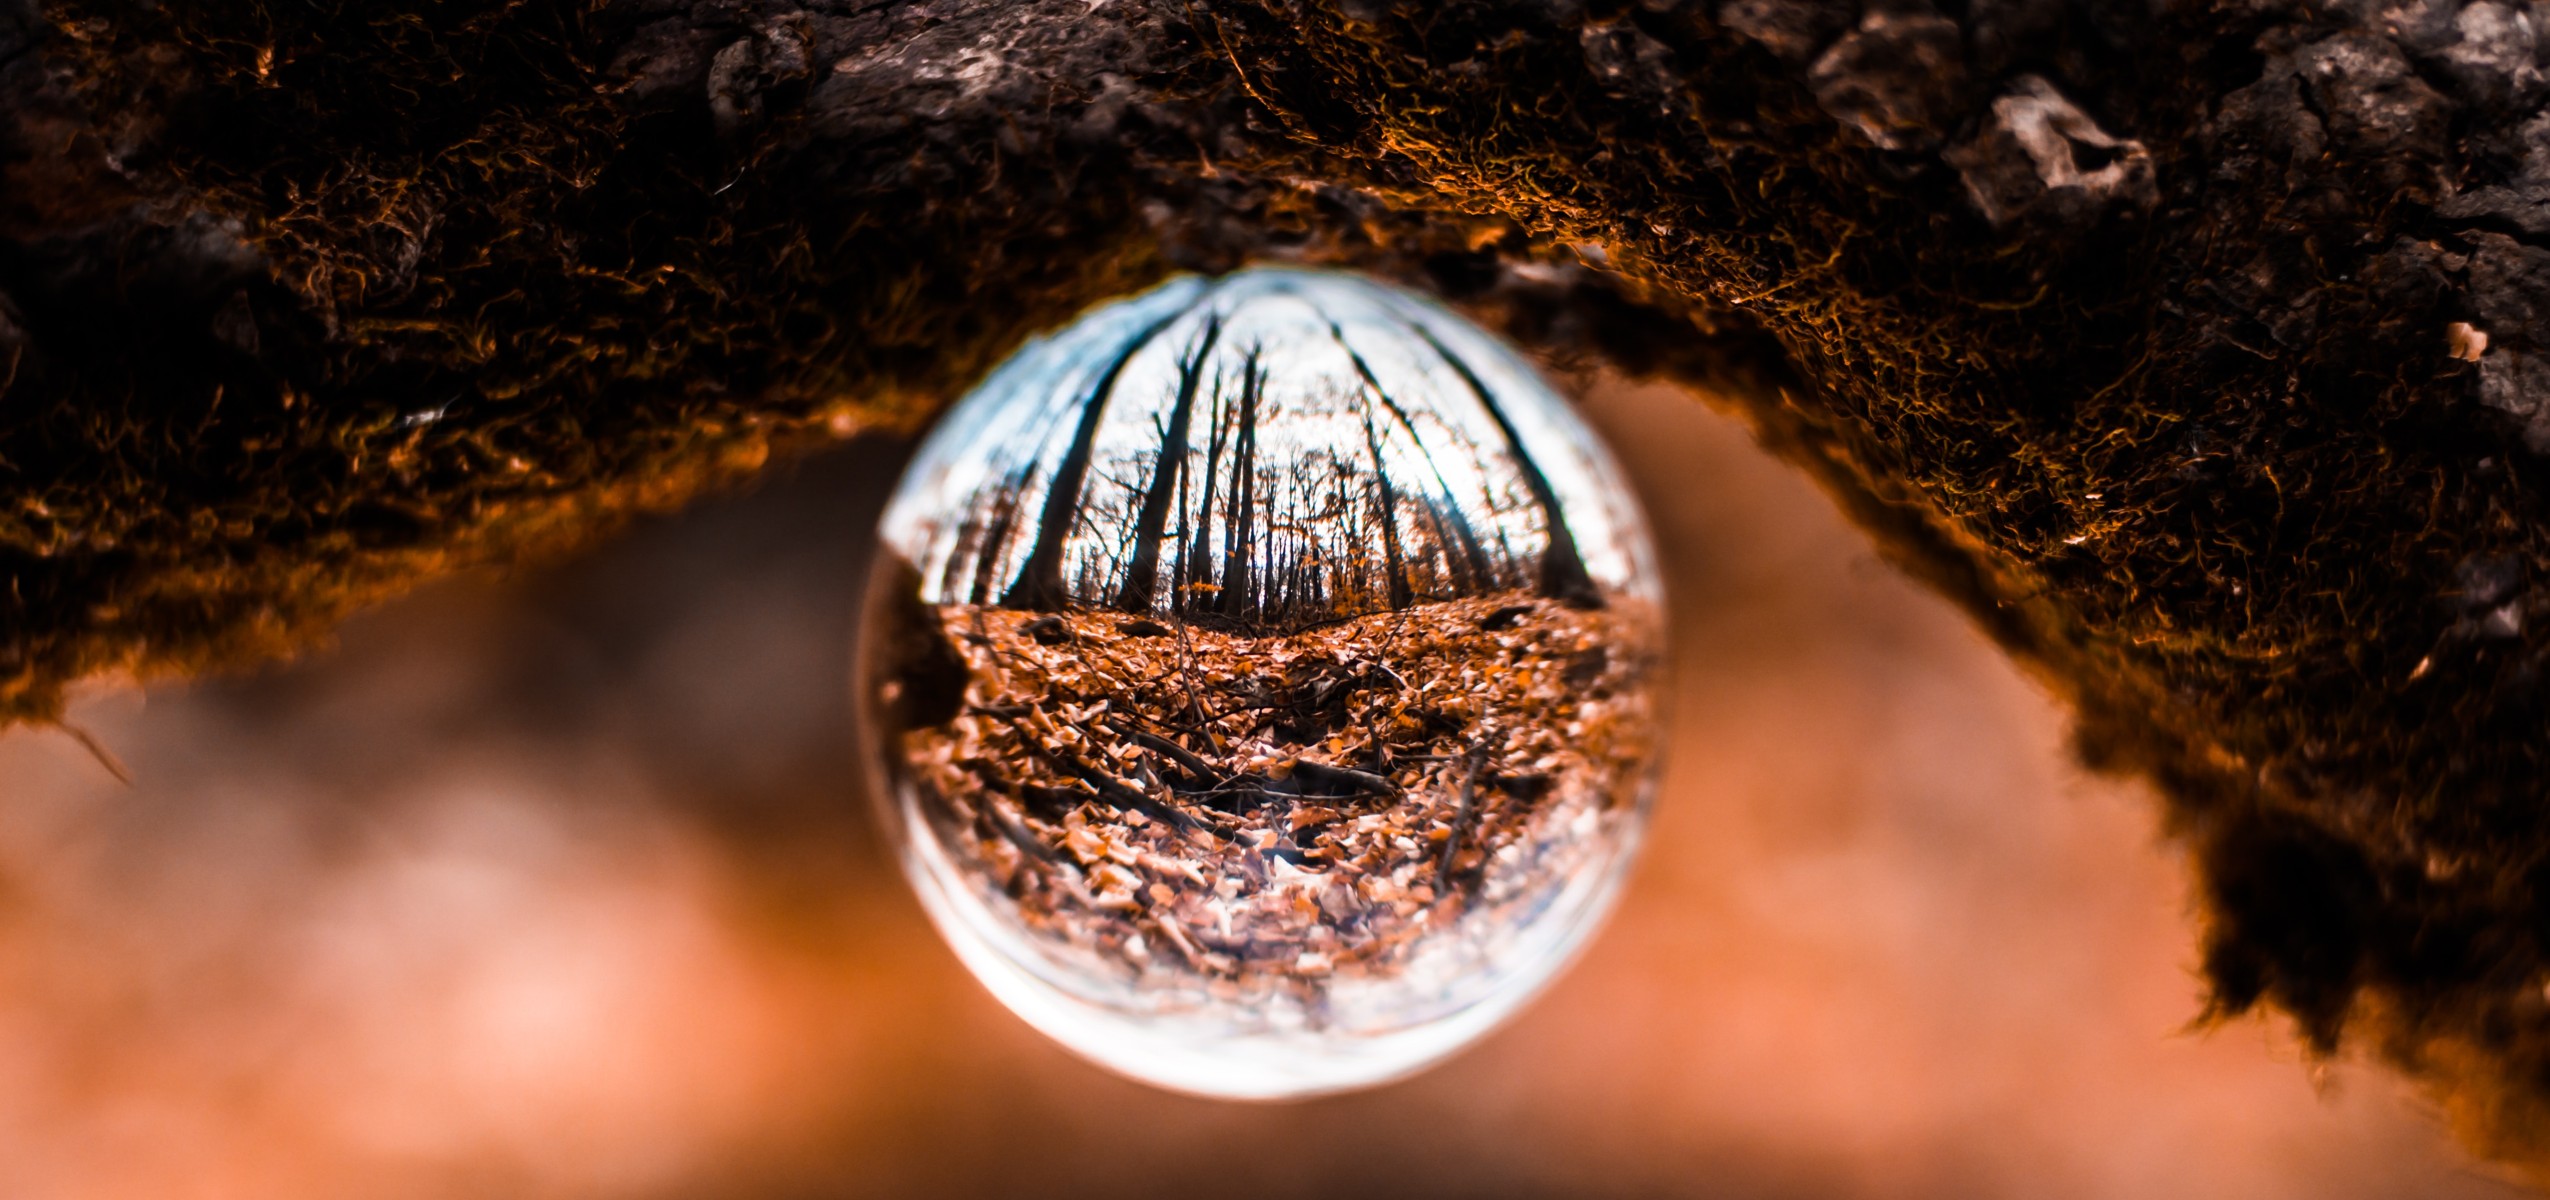 A reflective glass ball sits on a root of a tree, photographed upside-down to allow for the reflection inside of the glass ball to appear right-side up. The reflection shows the sky and the trees around in the forested area.